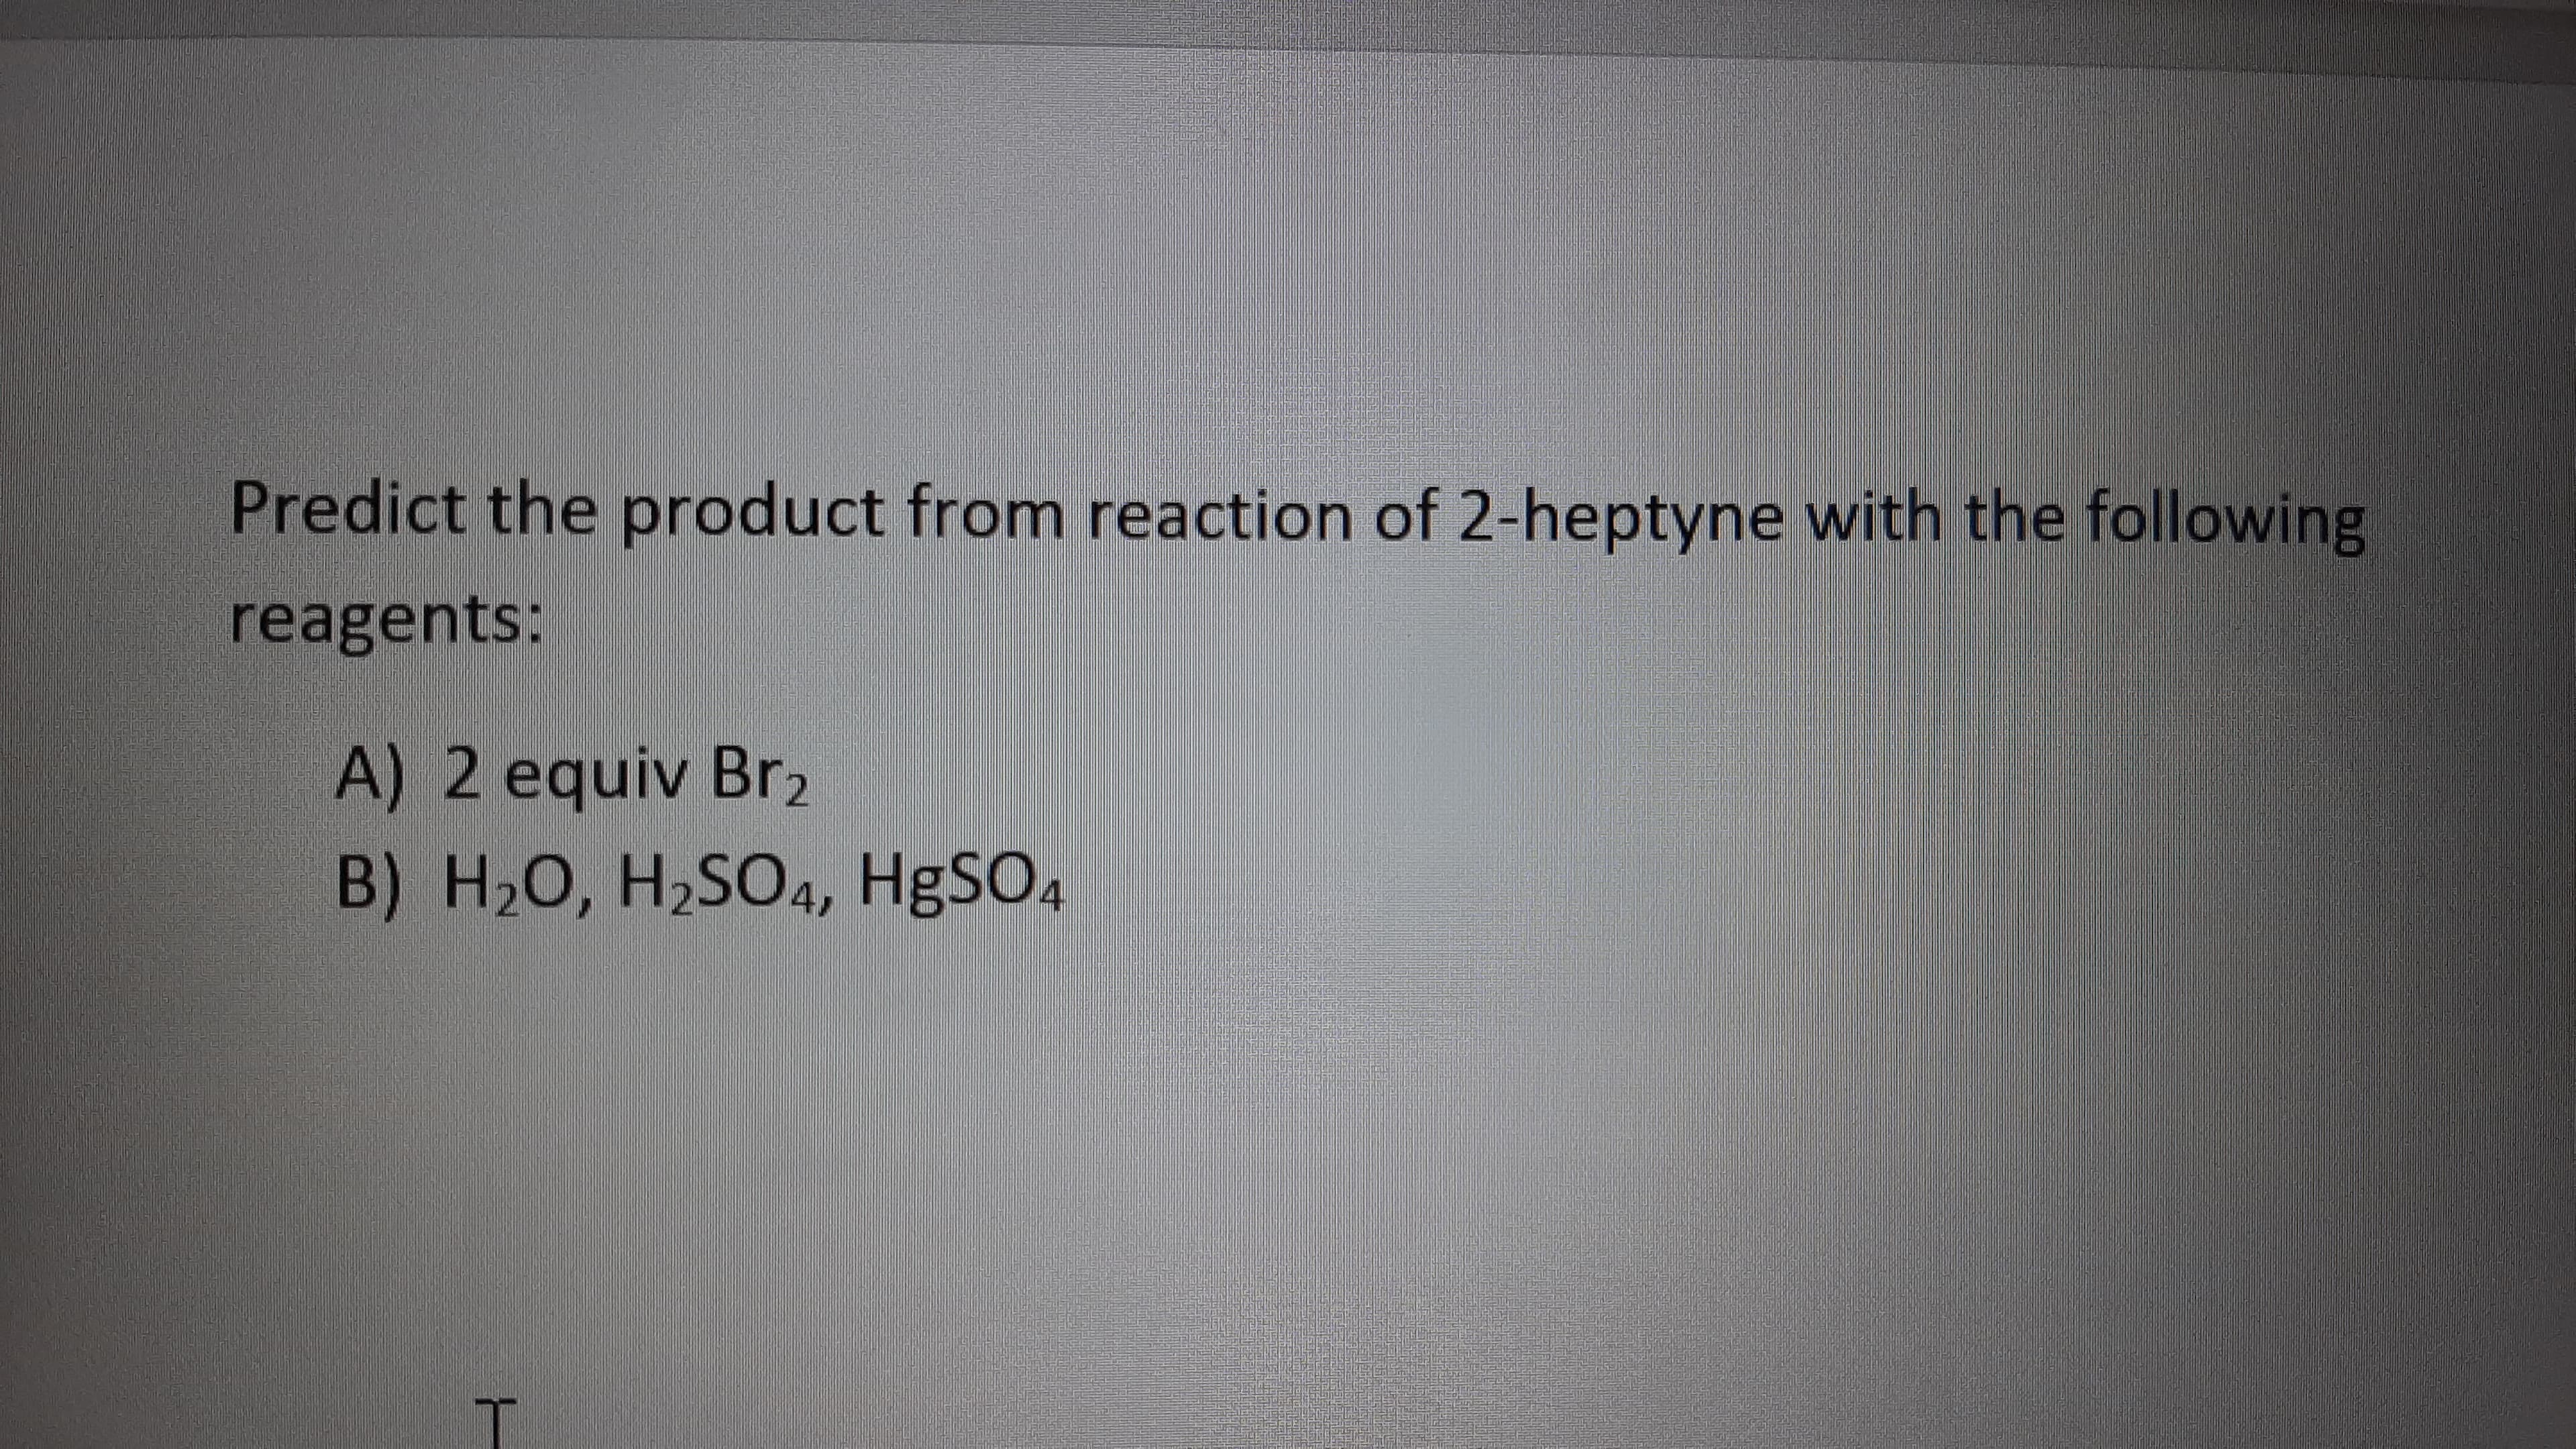 Predict the product from reaction of 2-heptyne with the following
reagents:
